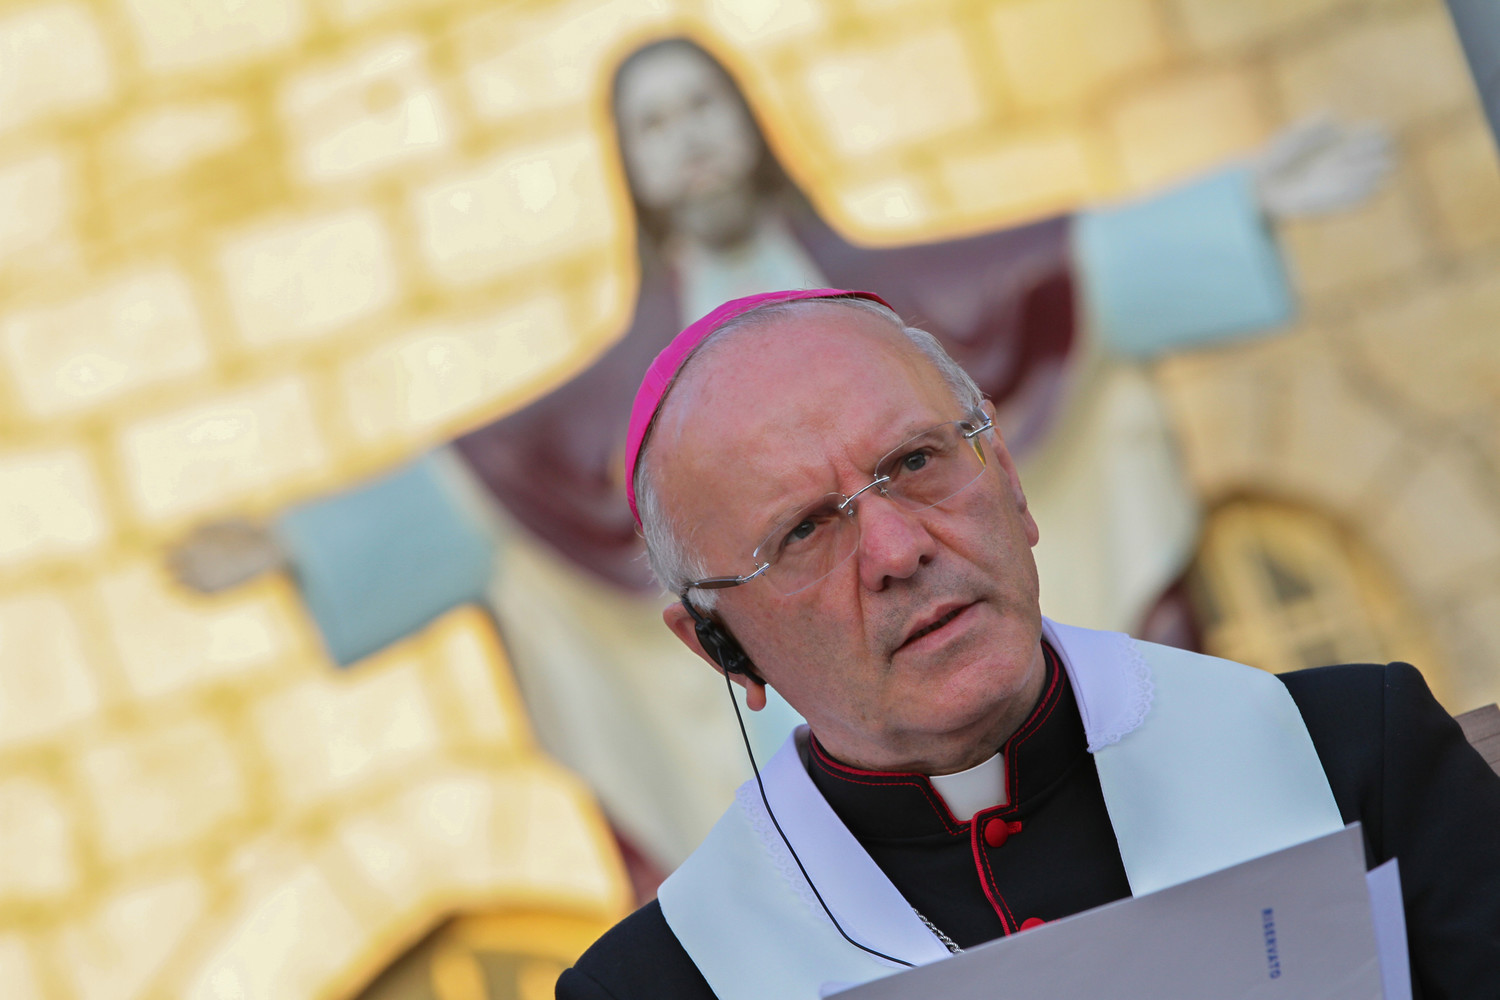 Bishop Nunzio Galantino, secretary-general of the Italian bishops’ conference, is seen in Jordan in this 2015 file photo.